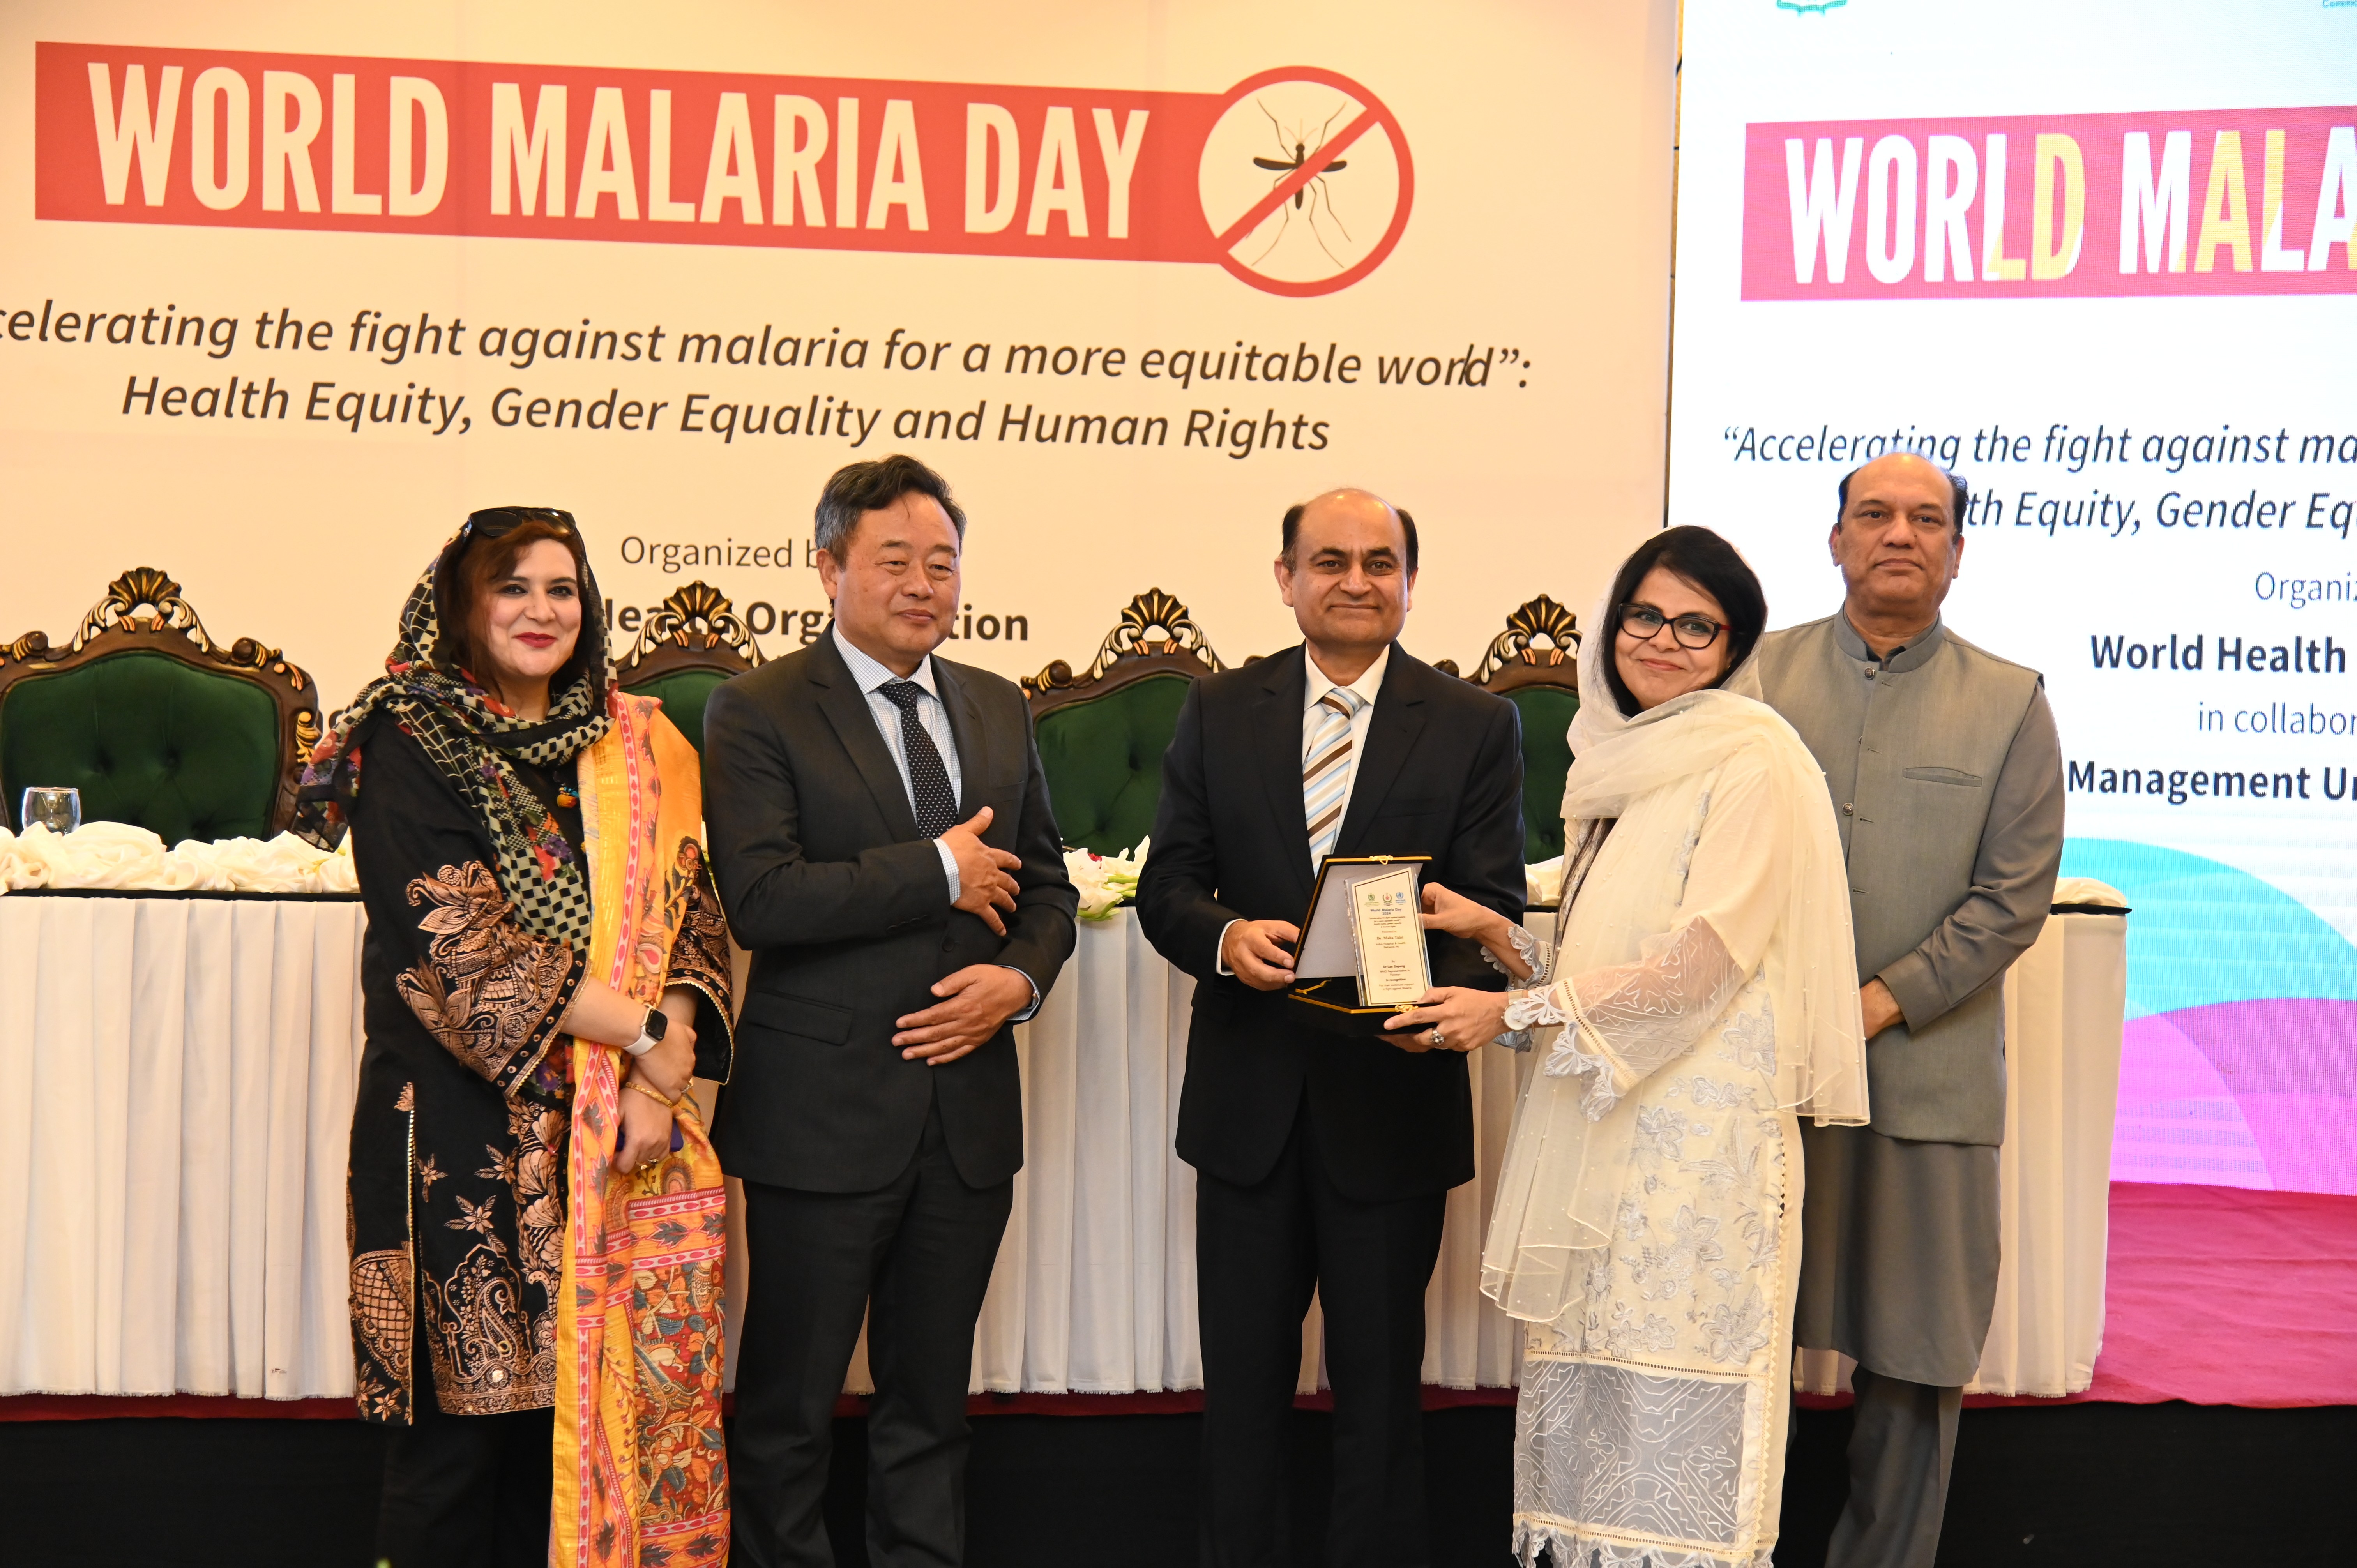 The shield distribution at the event of World Malaria Day 2034